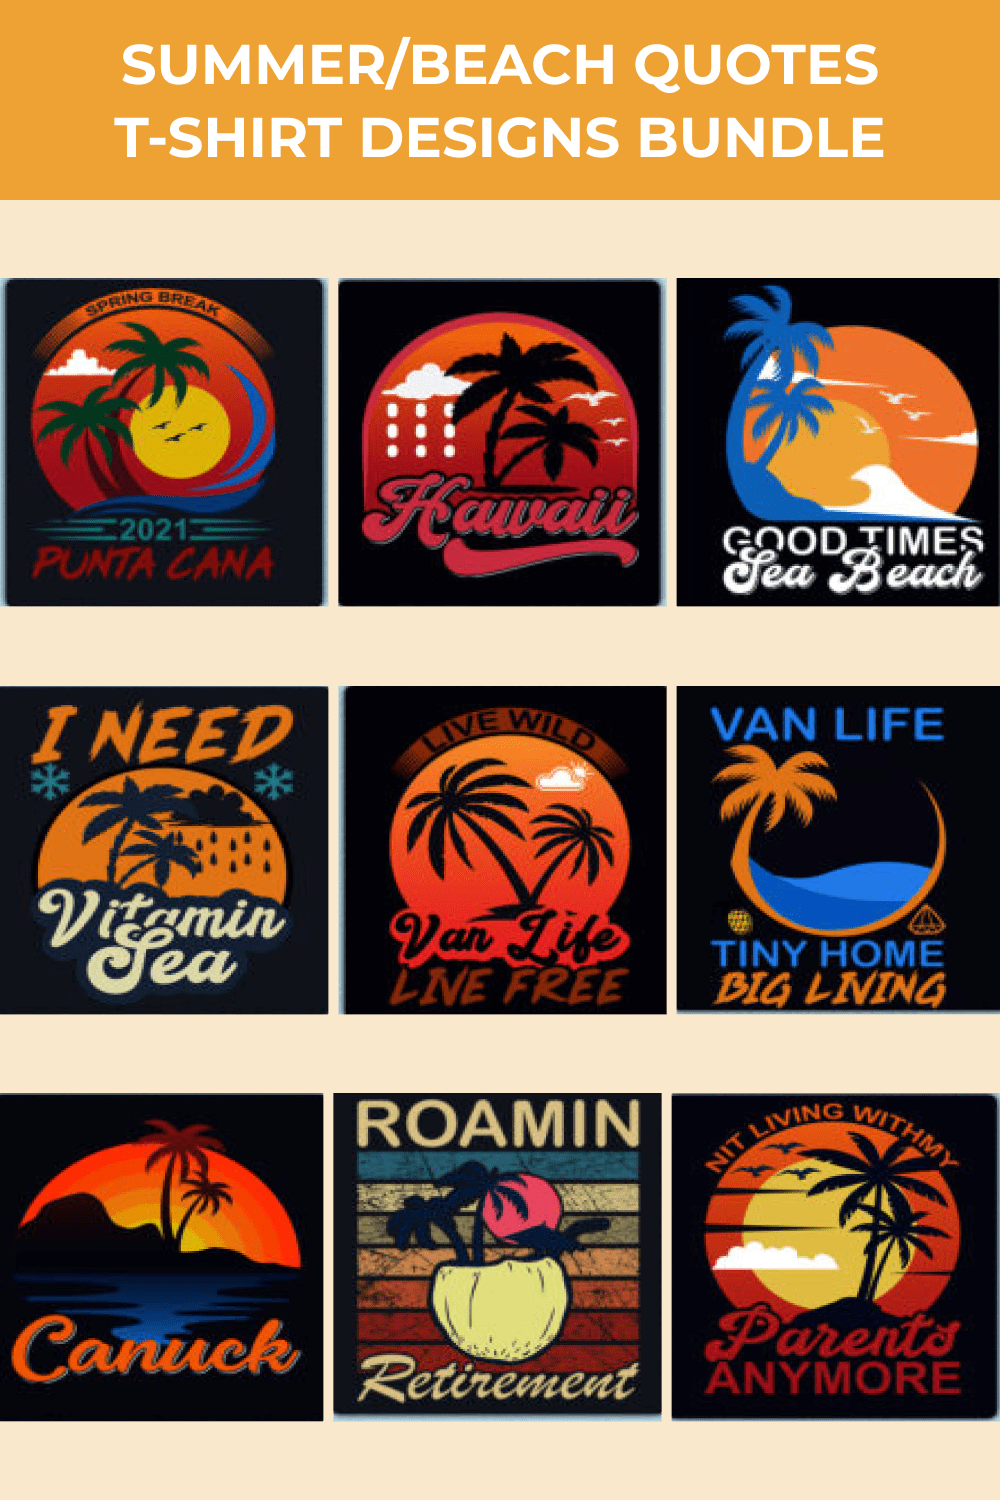 Several illustration options for T-shirts.